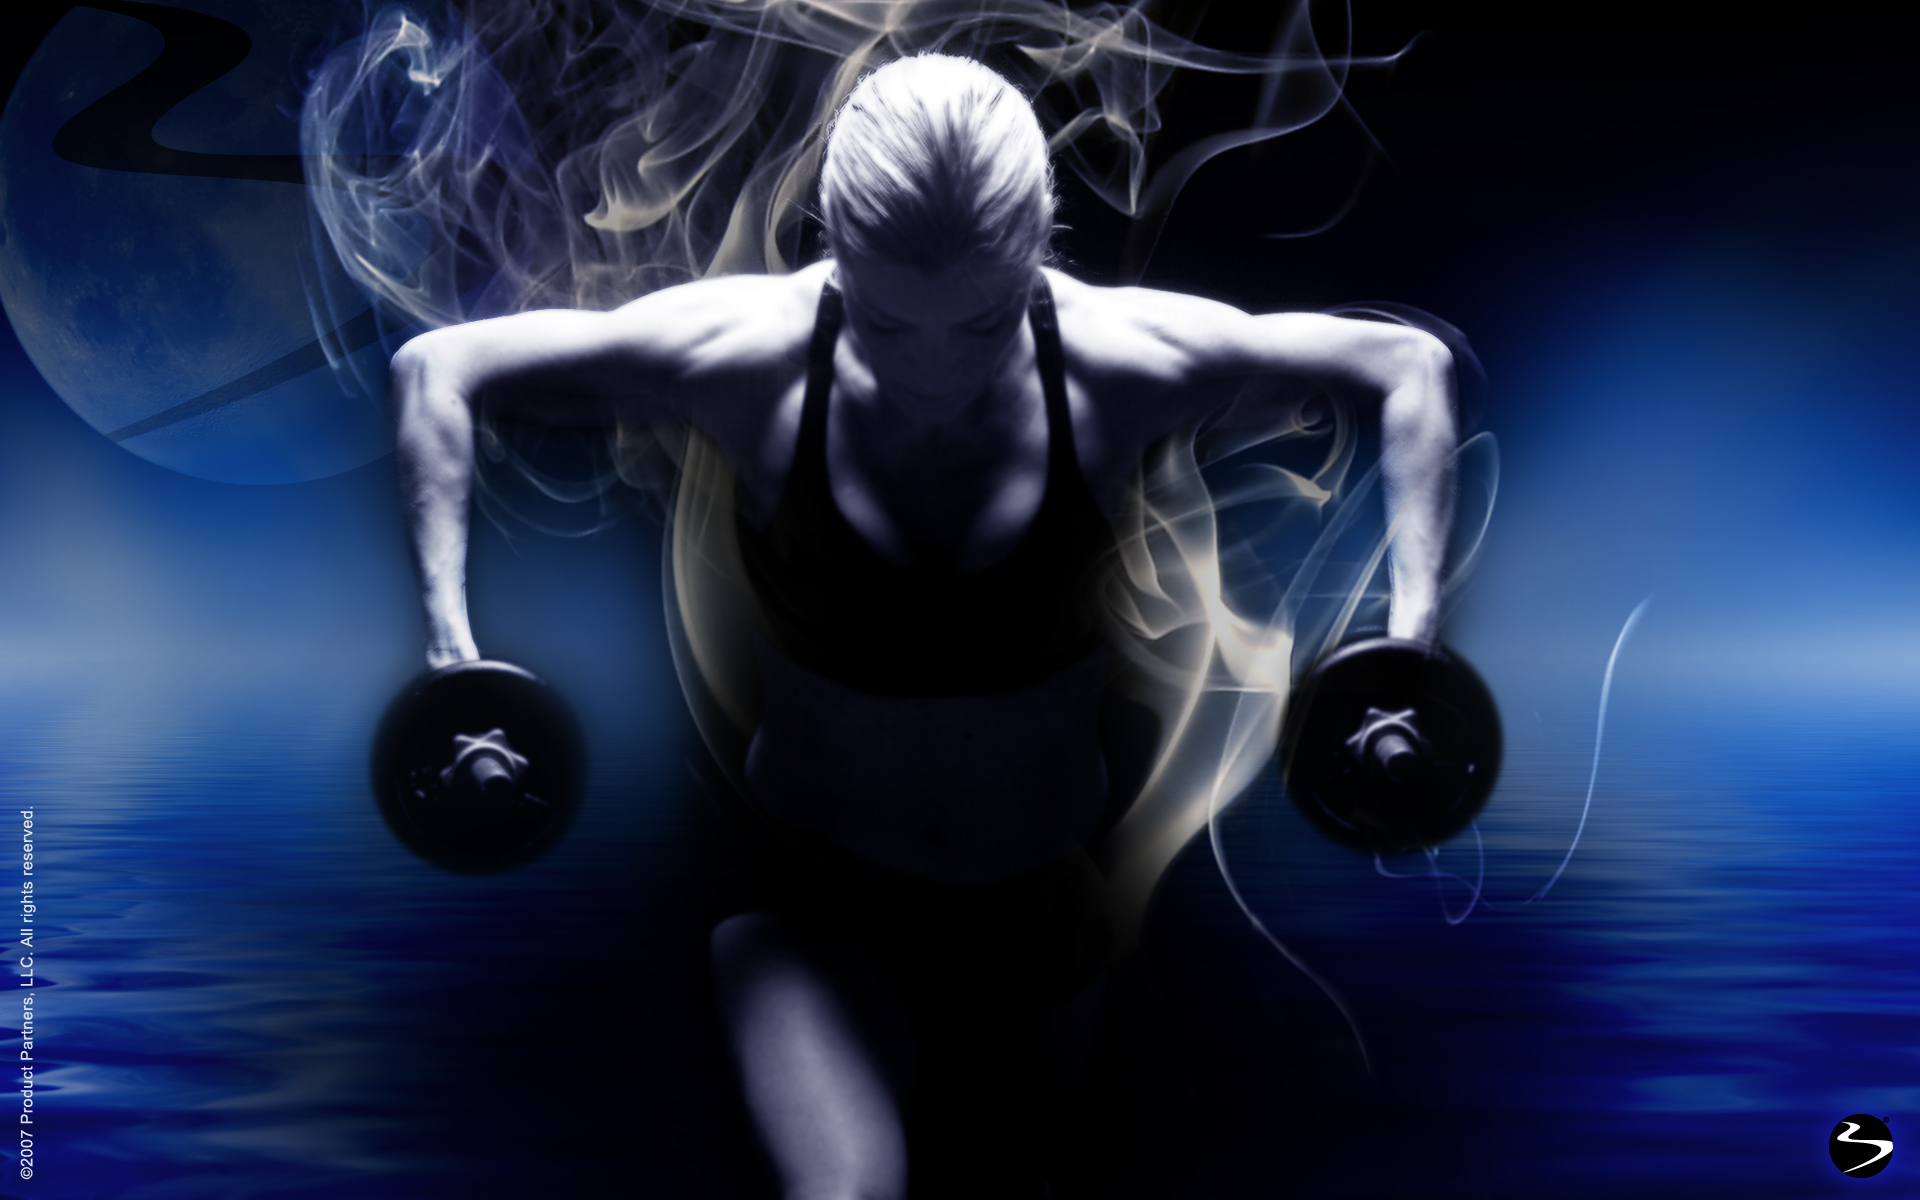 P90X Desktop Wallpaper submited images 1920x1200